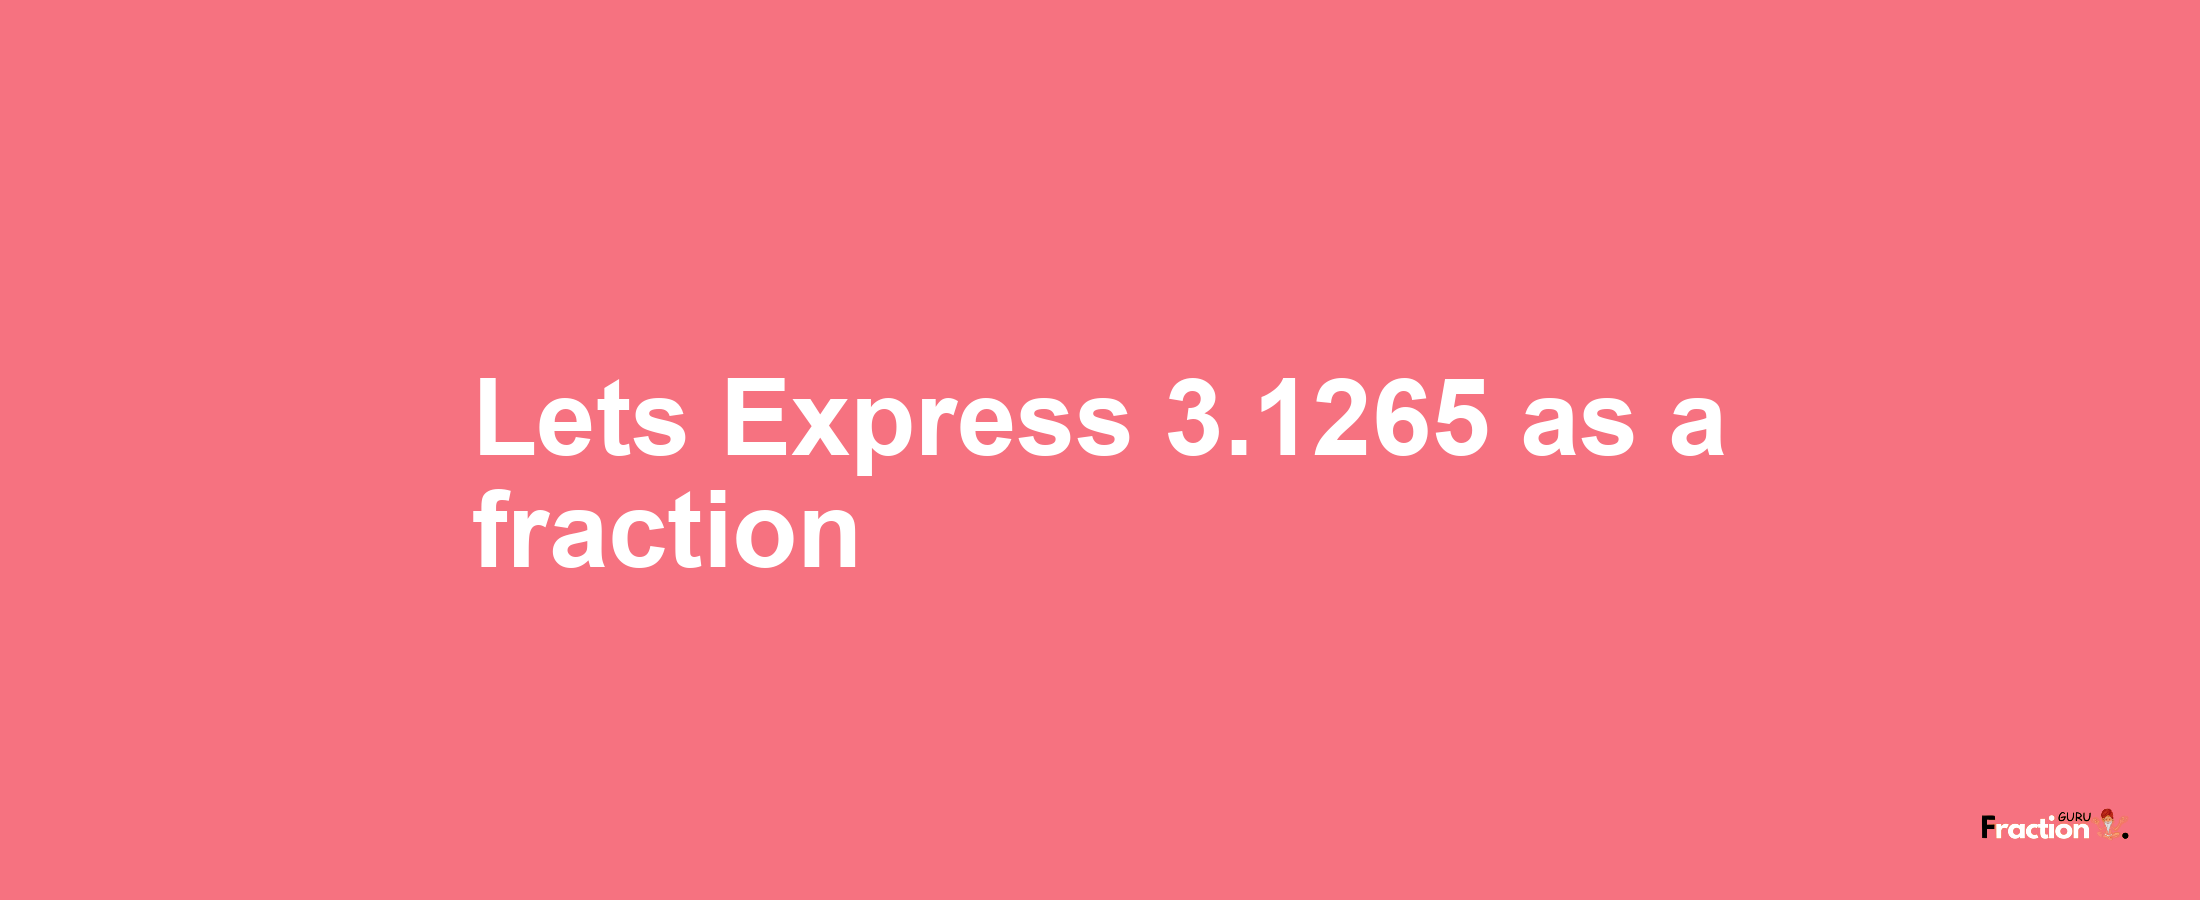 Lets Express 3.1265 as afraction